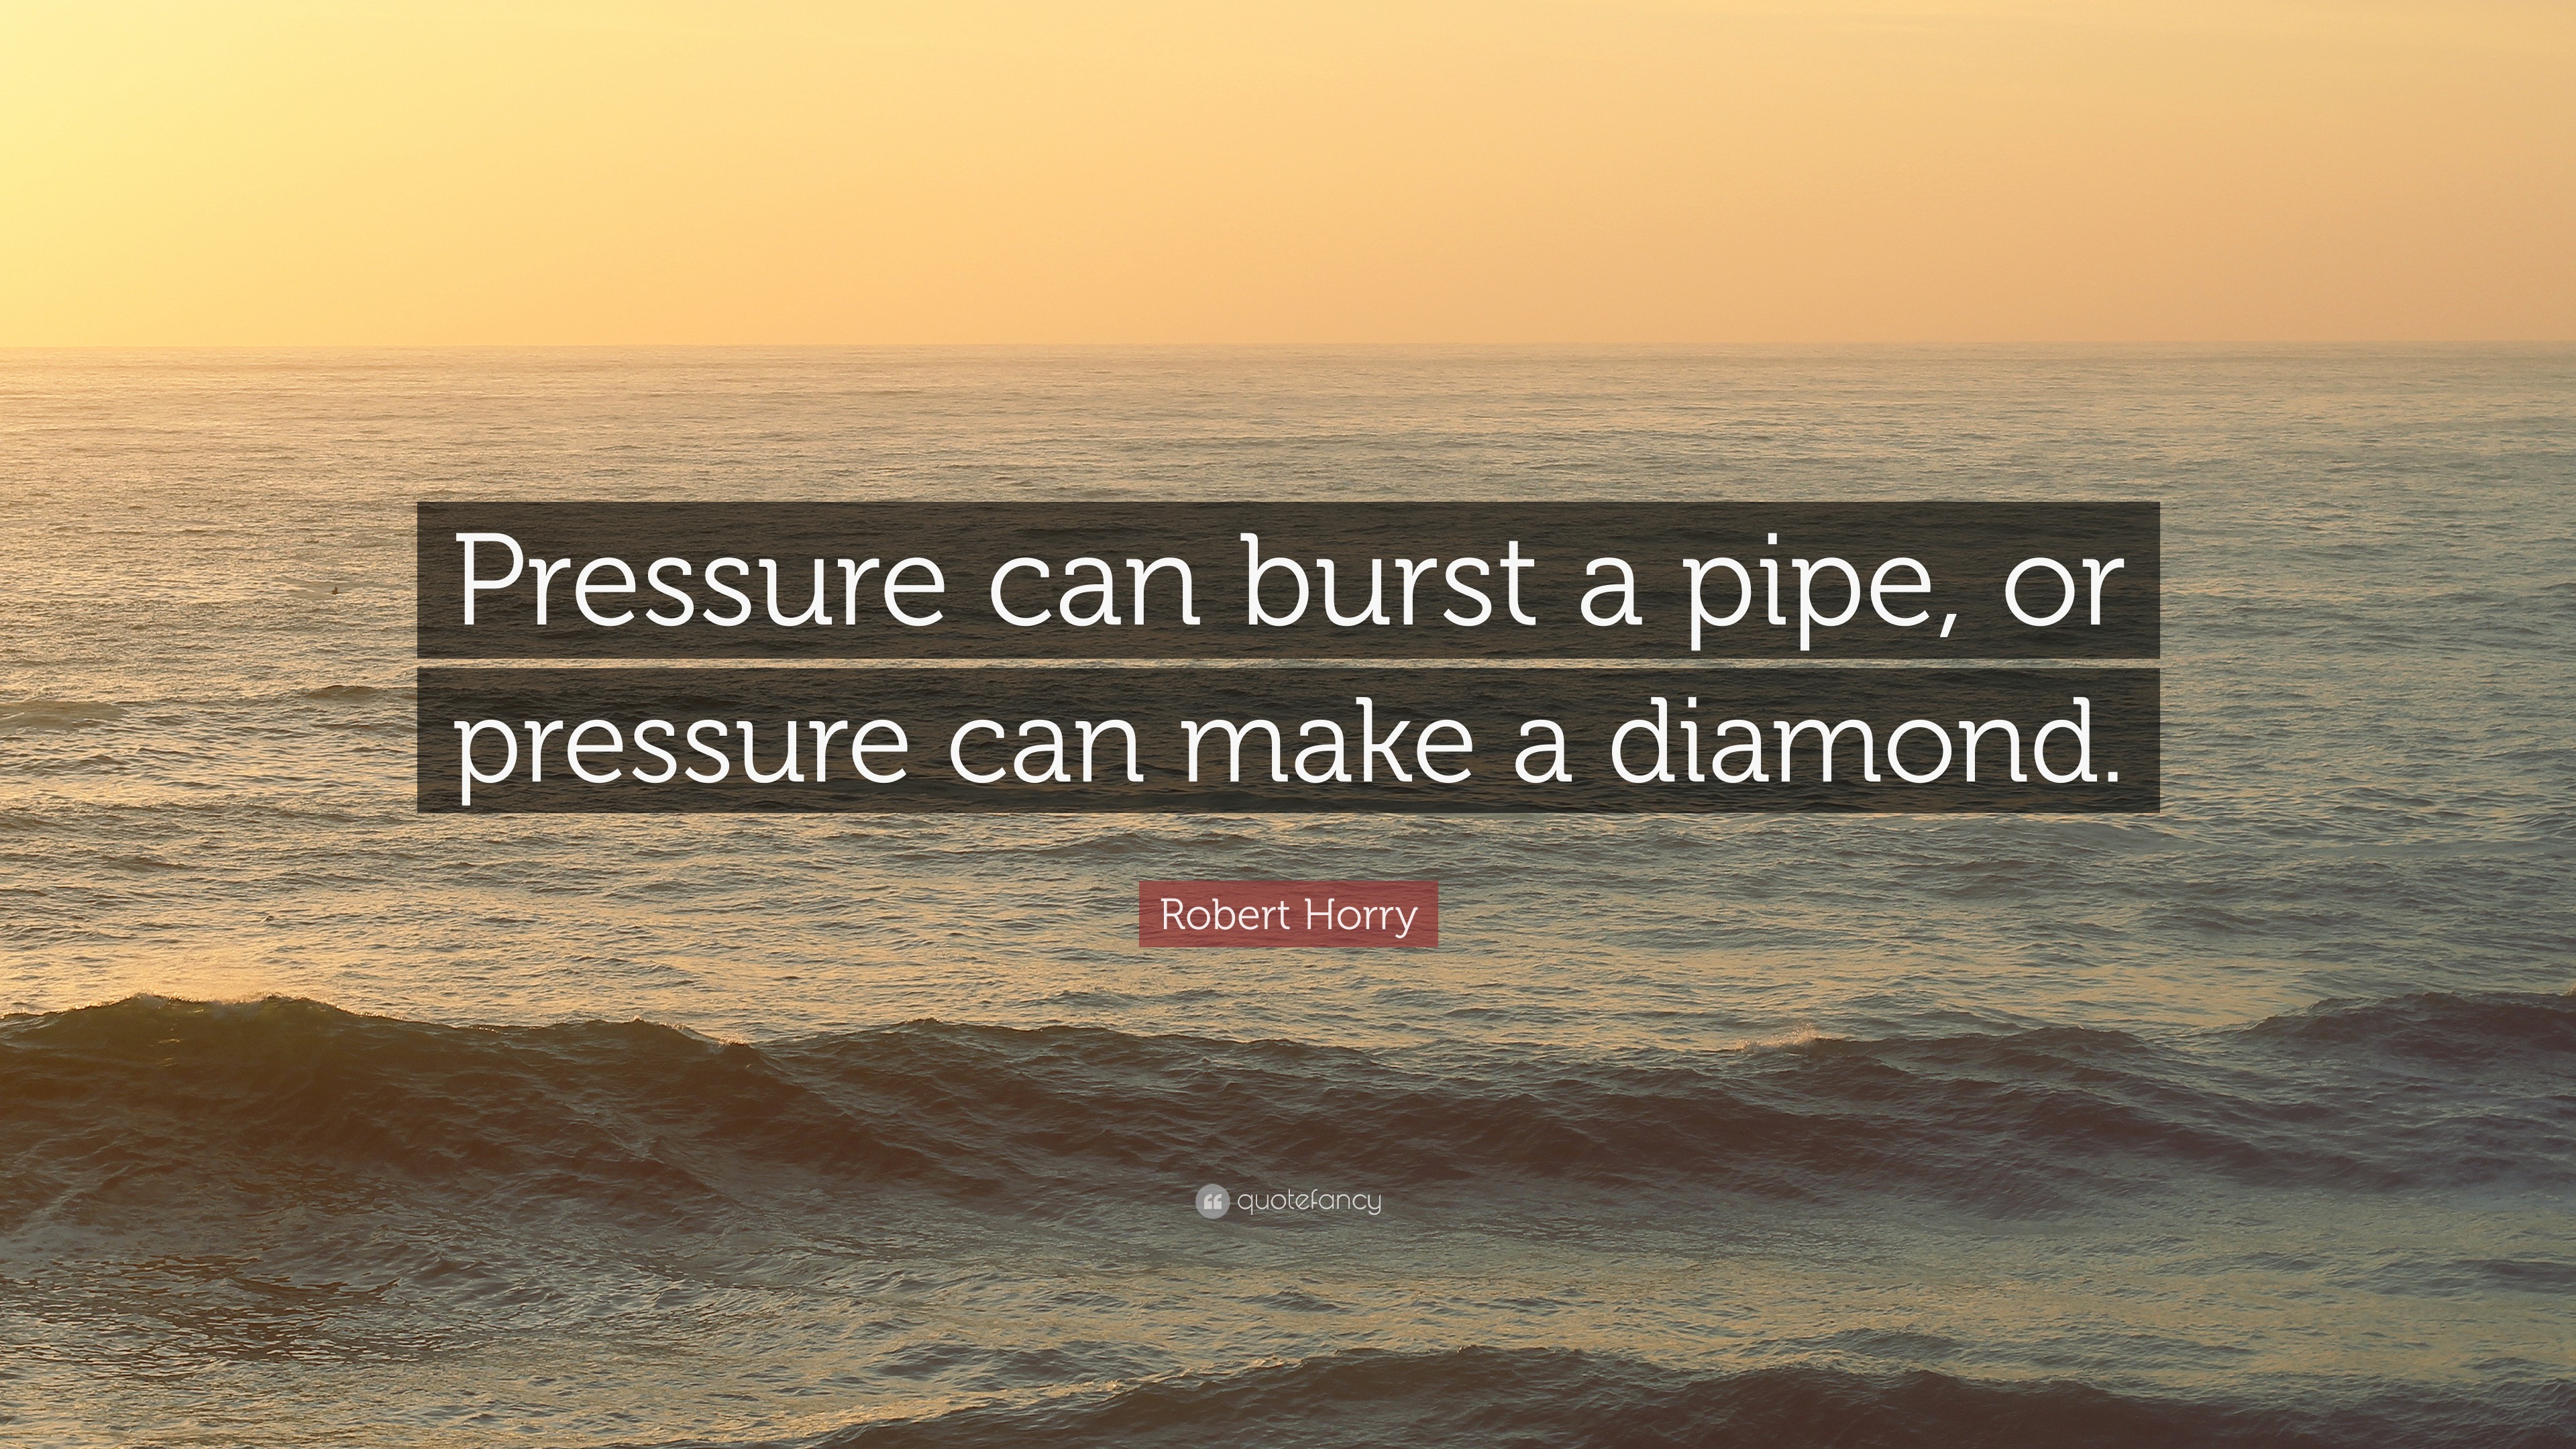 Pressure bust pipes